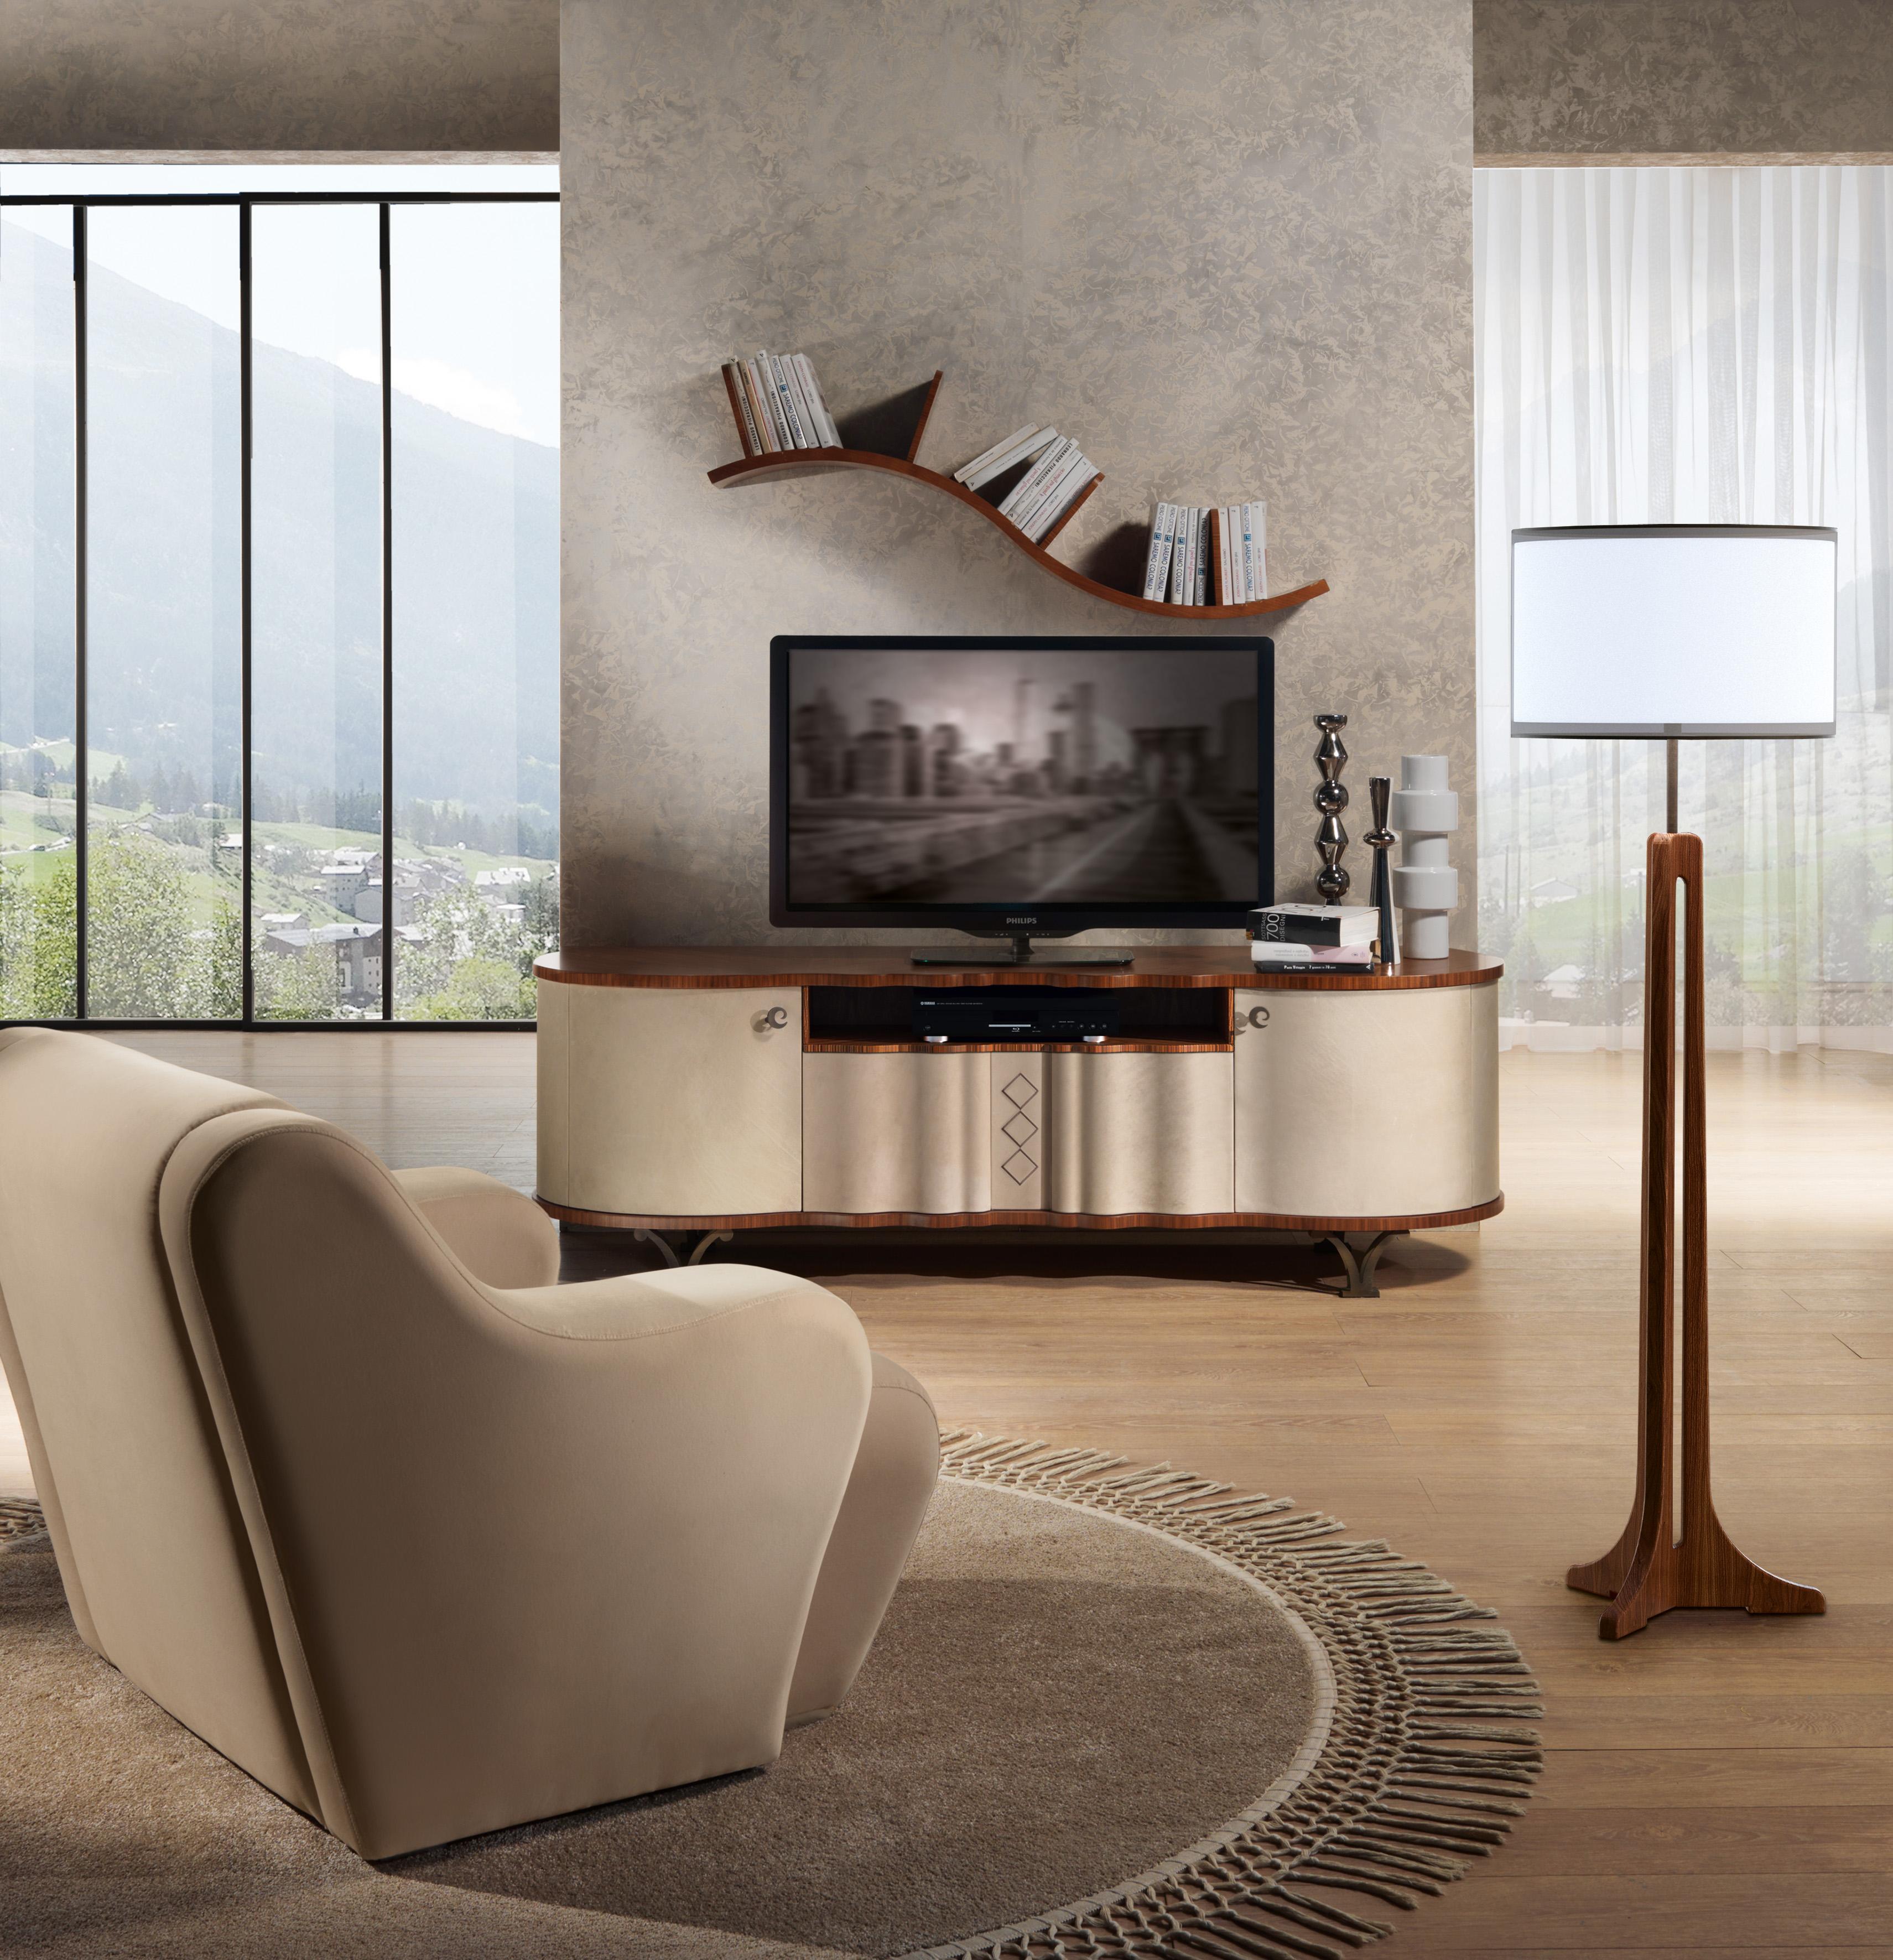 TV stand in wood coated leather. Top in natural walnut. Feet in steel, brushed bronze finishing. Handles in steel, brushed bronze finishing. Upholstery in nabuk leather, decoration: embroidery in narrow windings wire.